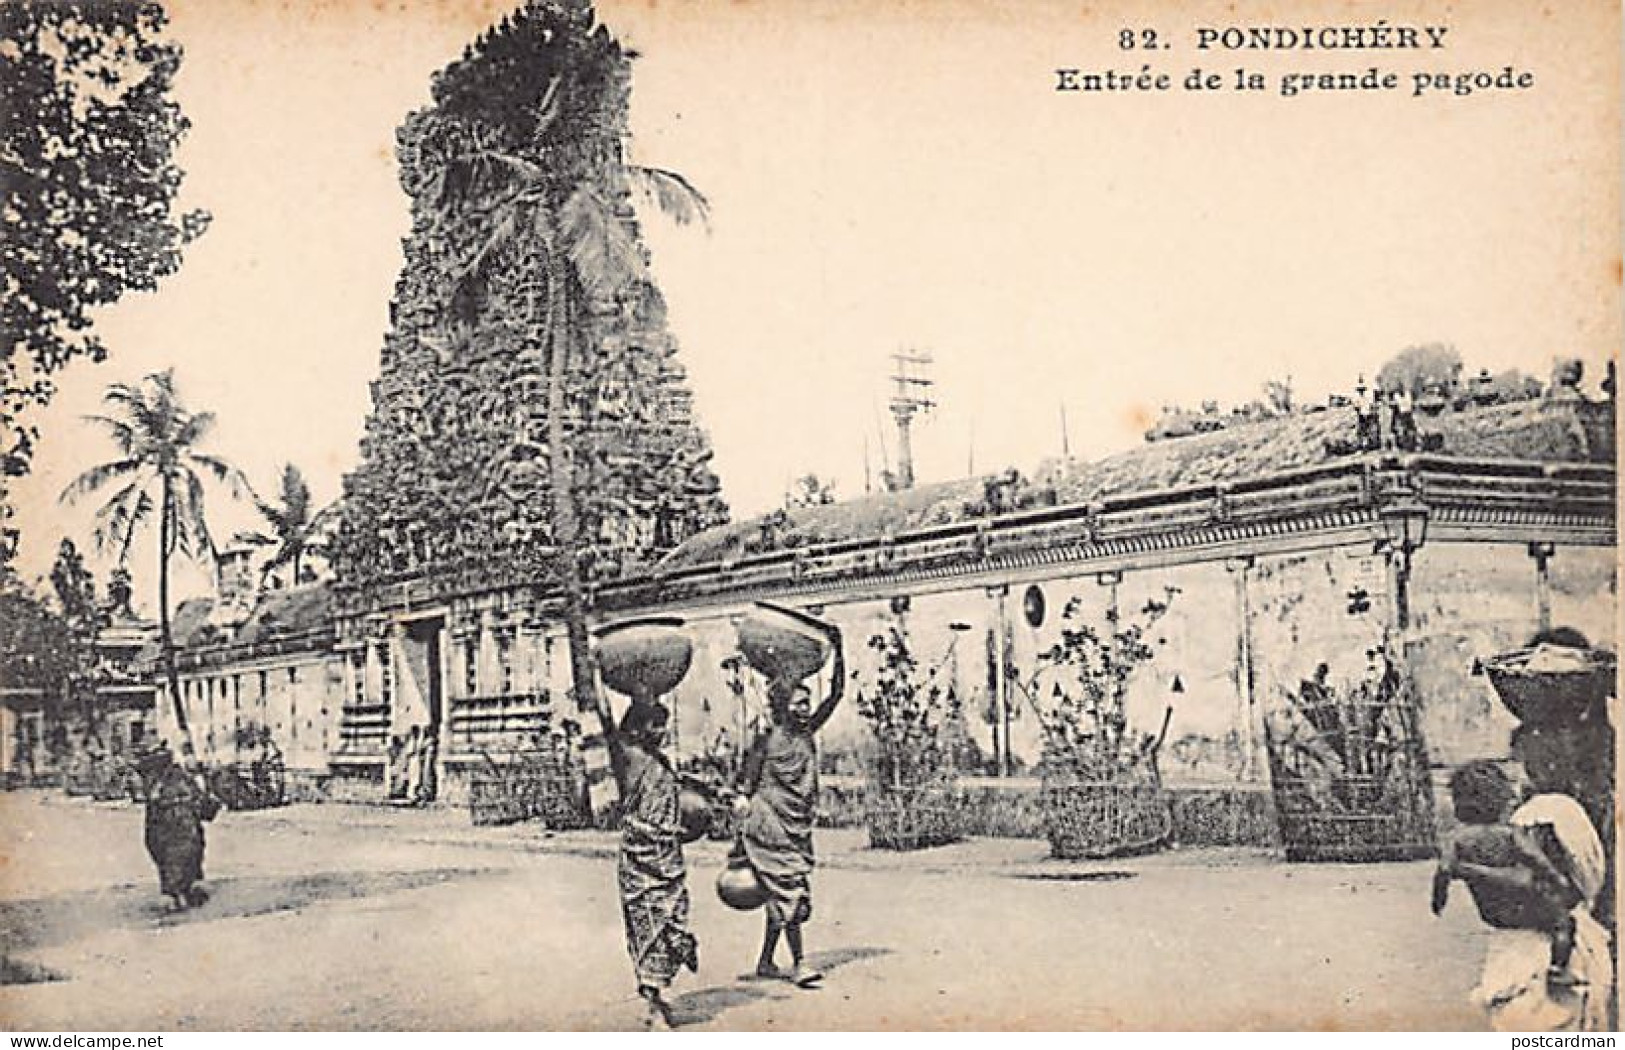 India - PUDUCHERRY Pondichéry - Entrance To The Villianur Pagoda - Publ. Messageries Maritimes 82 - Inde